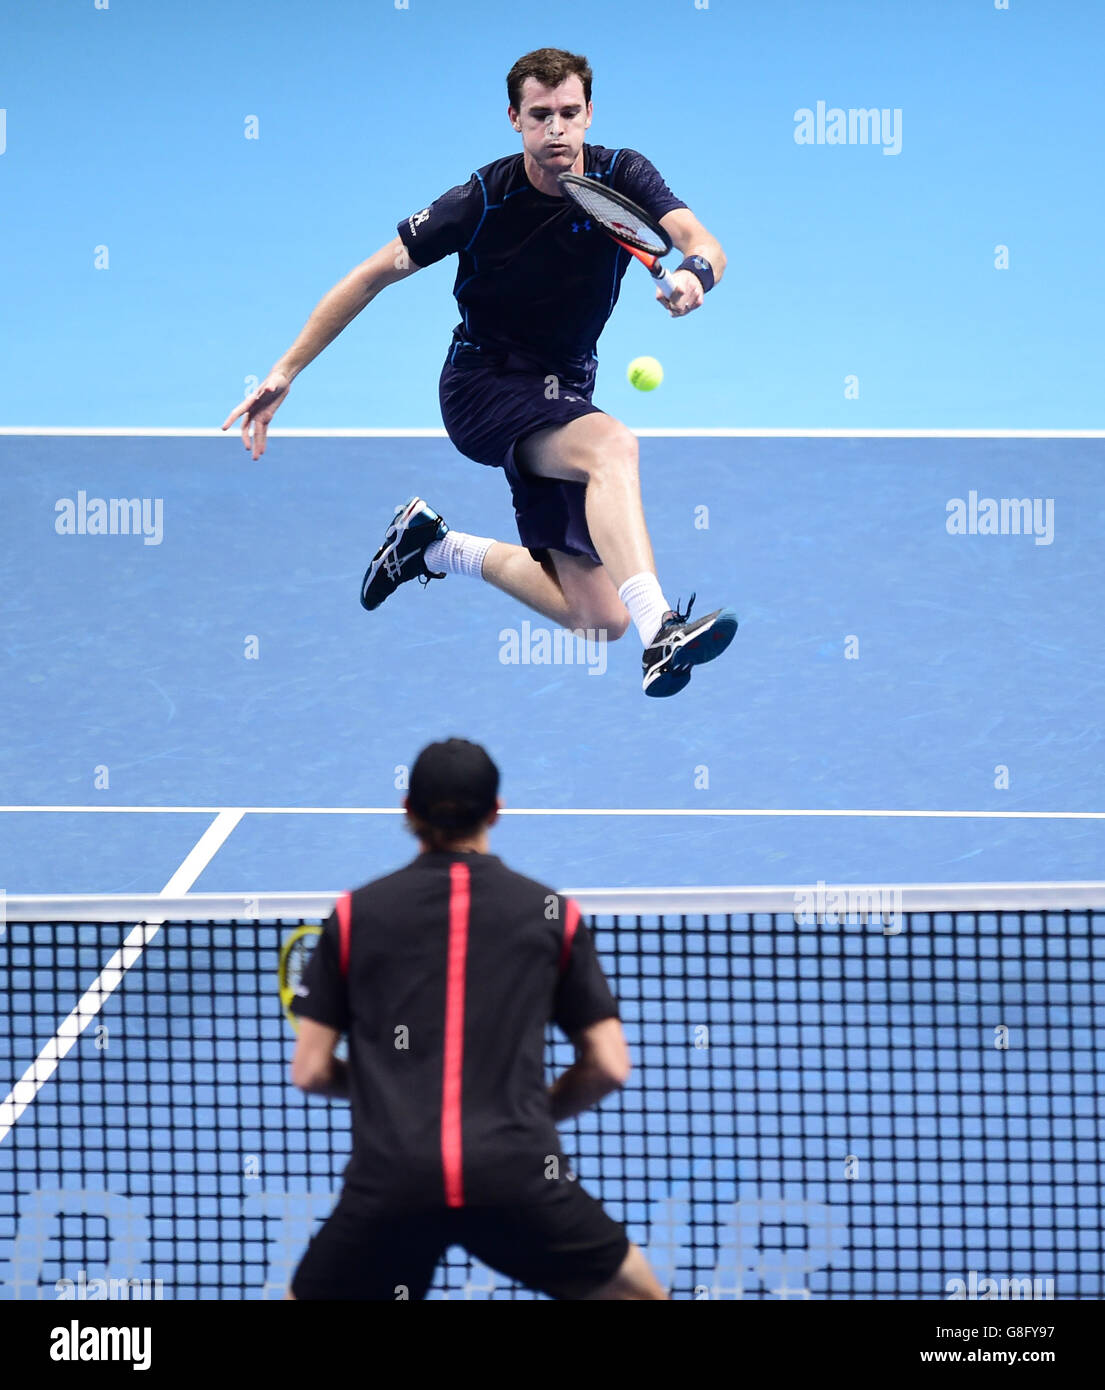 Great Britain's Jamie Murray (top) and Australia's John Peers (not pictured) in the Men's Doubles during day five of the ATP World Tour Finals at the O2 Arena, London. PRESS ASSSOCIATION Photo. Picture date: Thursday November 19, 2015. See PA story TENNIS London. Photo credit should read: Adam Davy/PA Wire. Stock Photo